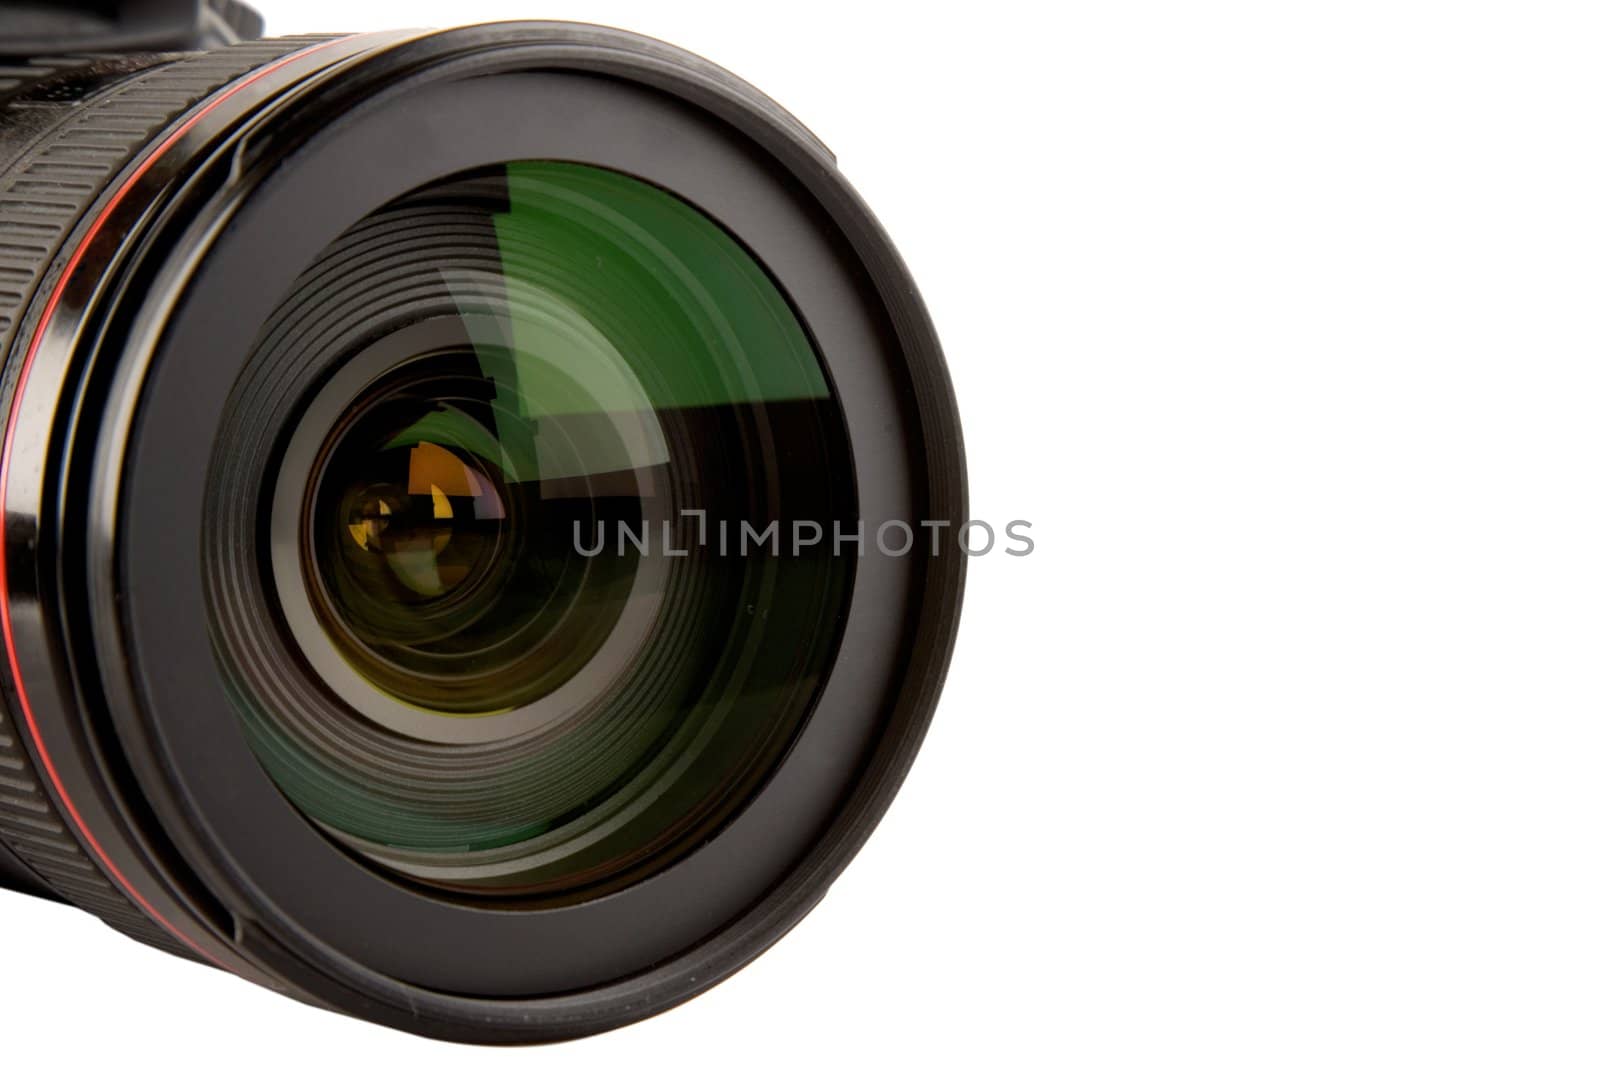 closeup of professional photo lens, isolated on white background